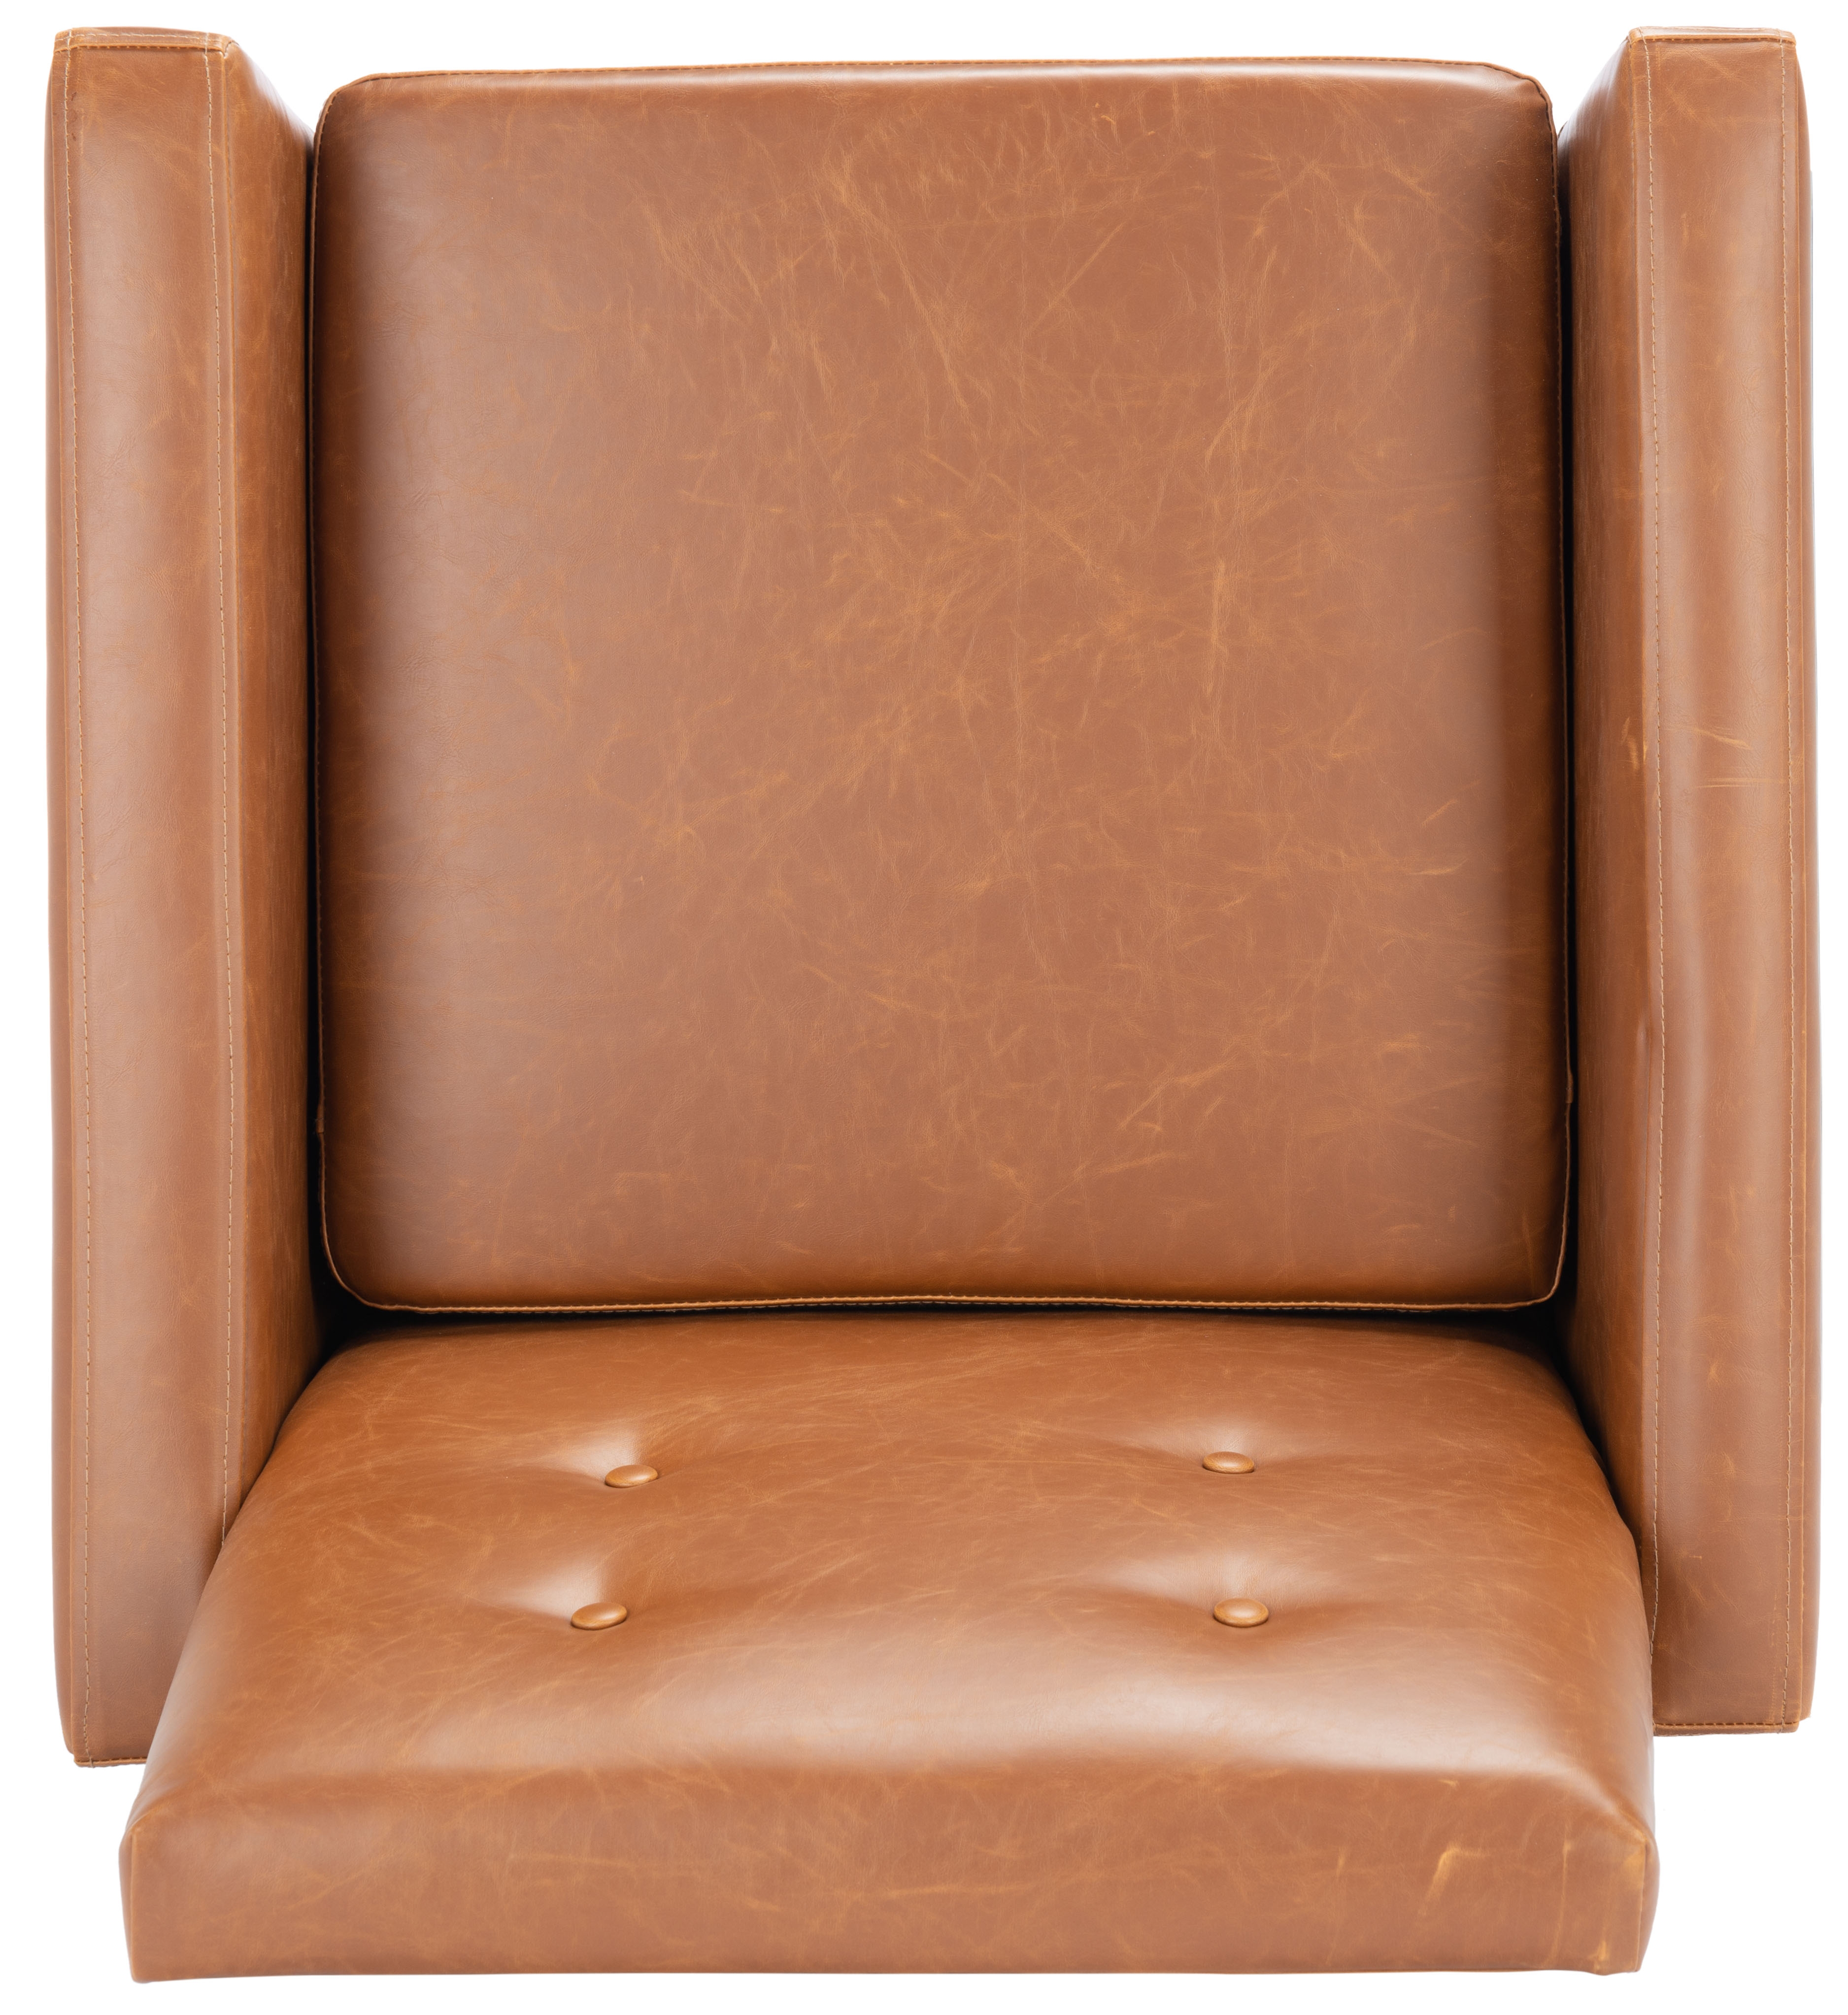 Visby Chair - Image 6